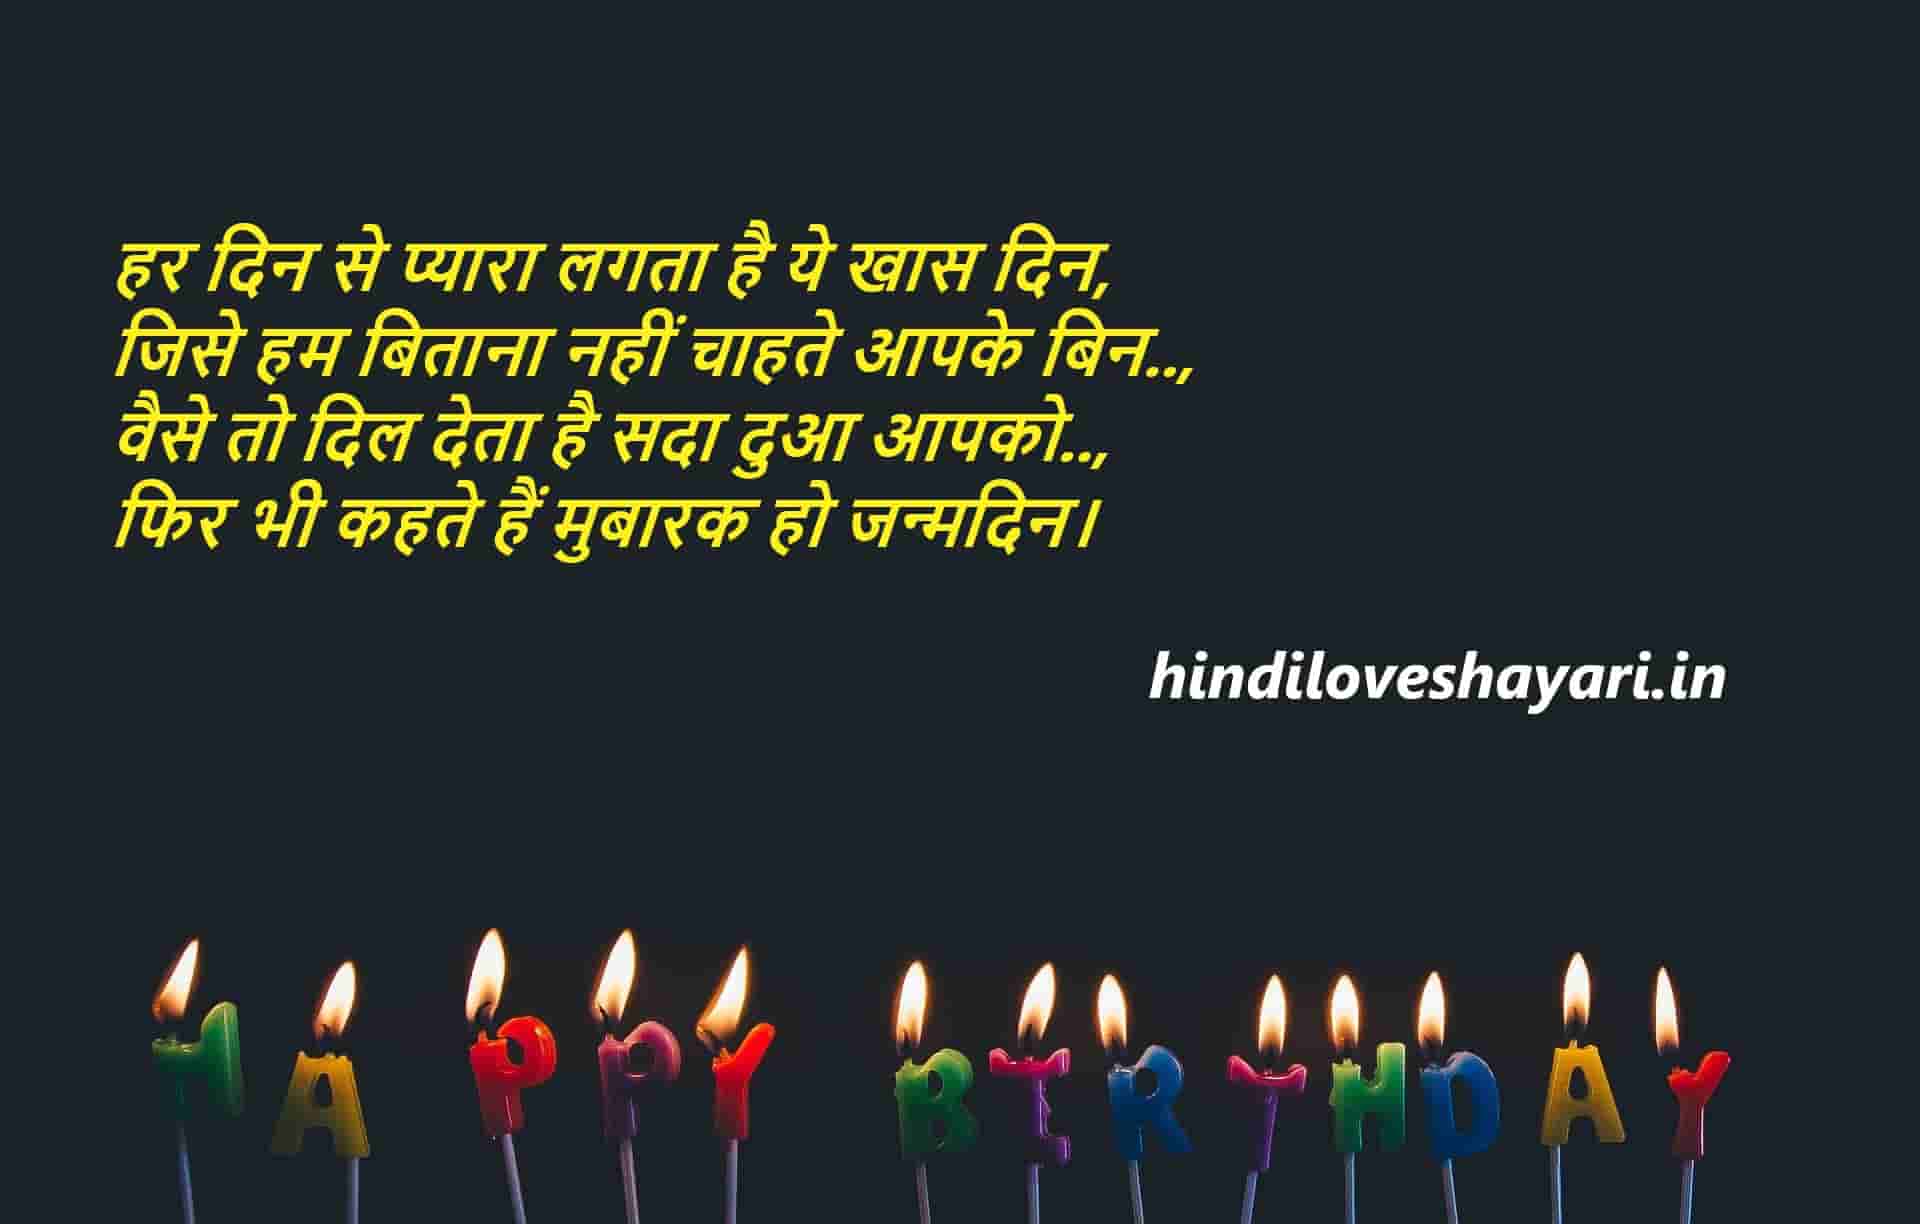 birthday shayari text is written in yellow colour on black wll with happy birthday cancles on